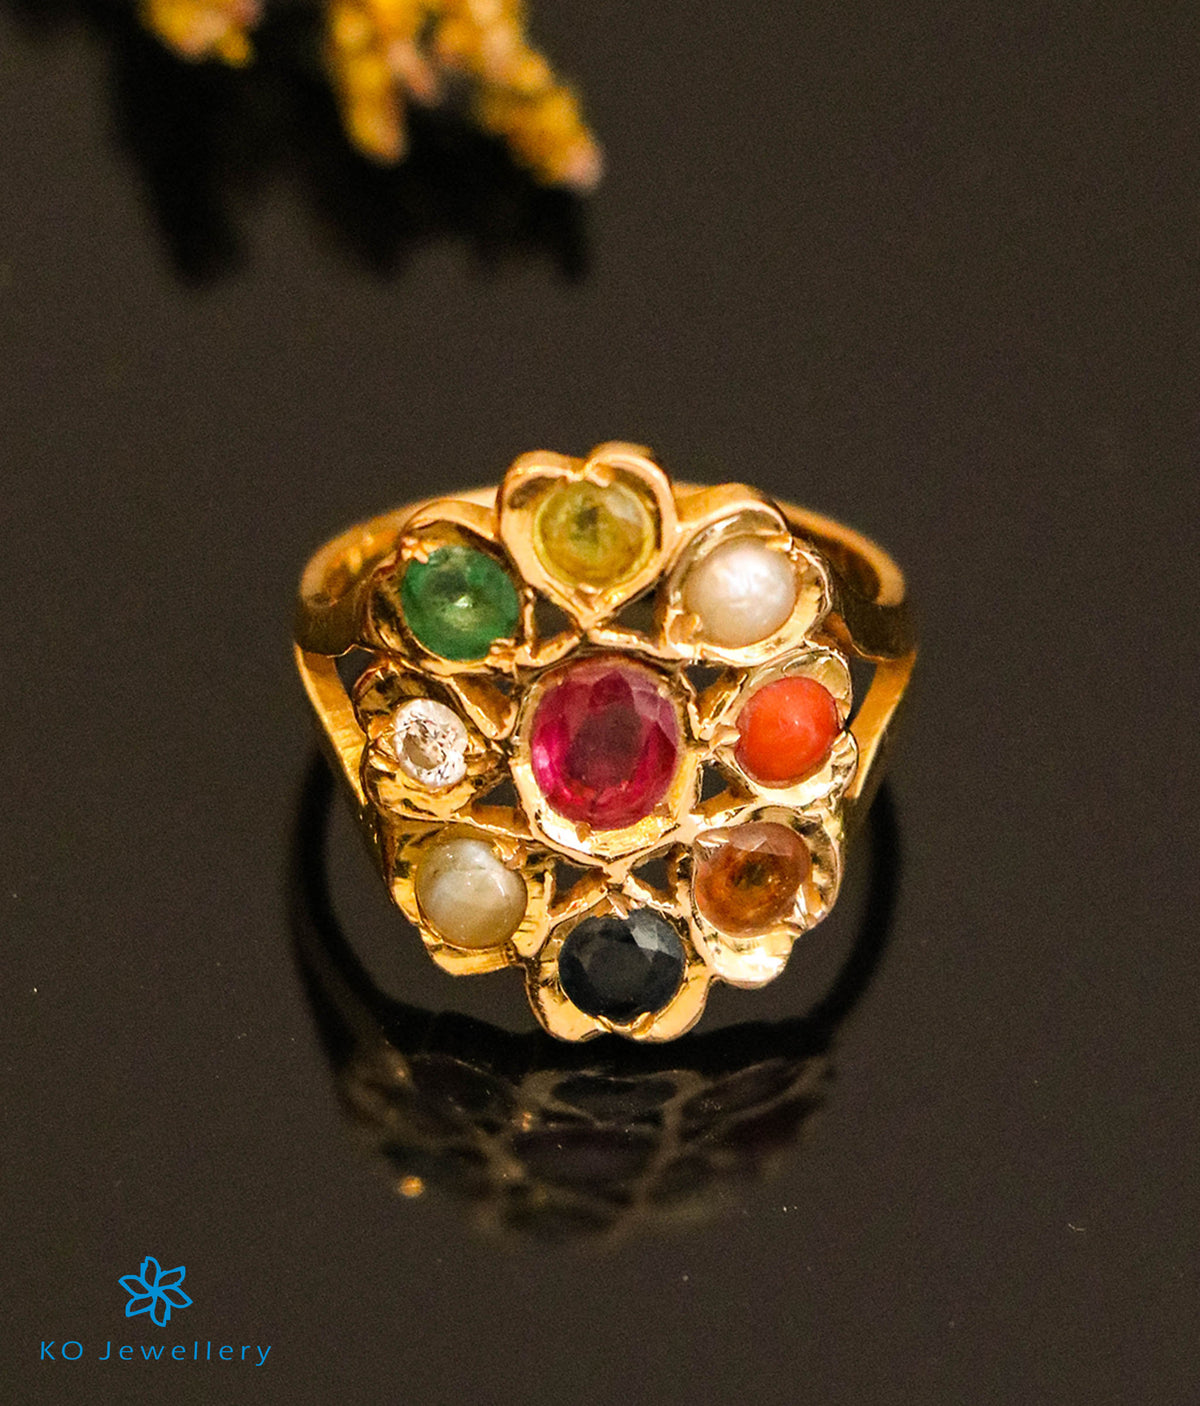 Navaratna Indian Jewelry – Meaning & Designs by Sampat Jewellers Inc.